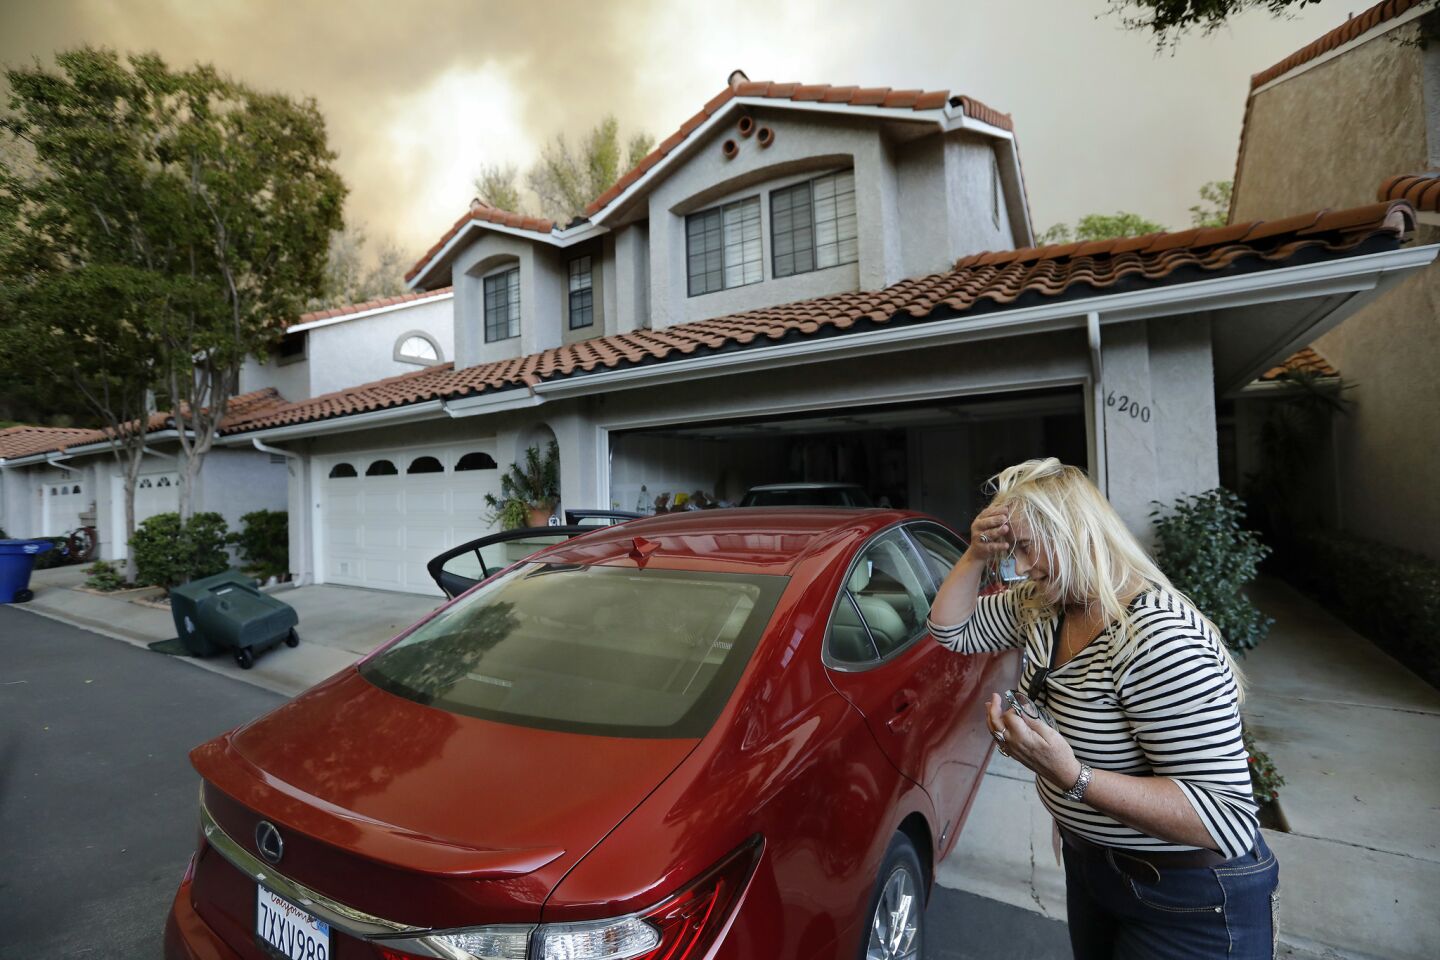 Carolina Heuel, a resident of the Miramonte Palmeras Tierras condominium complex in Camarillo Springs, prepares to evacuate after loading her two cats and a cockatiel into her car.